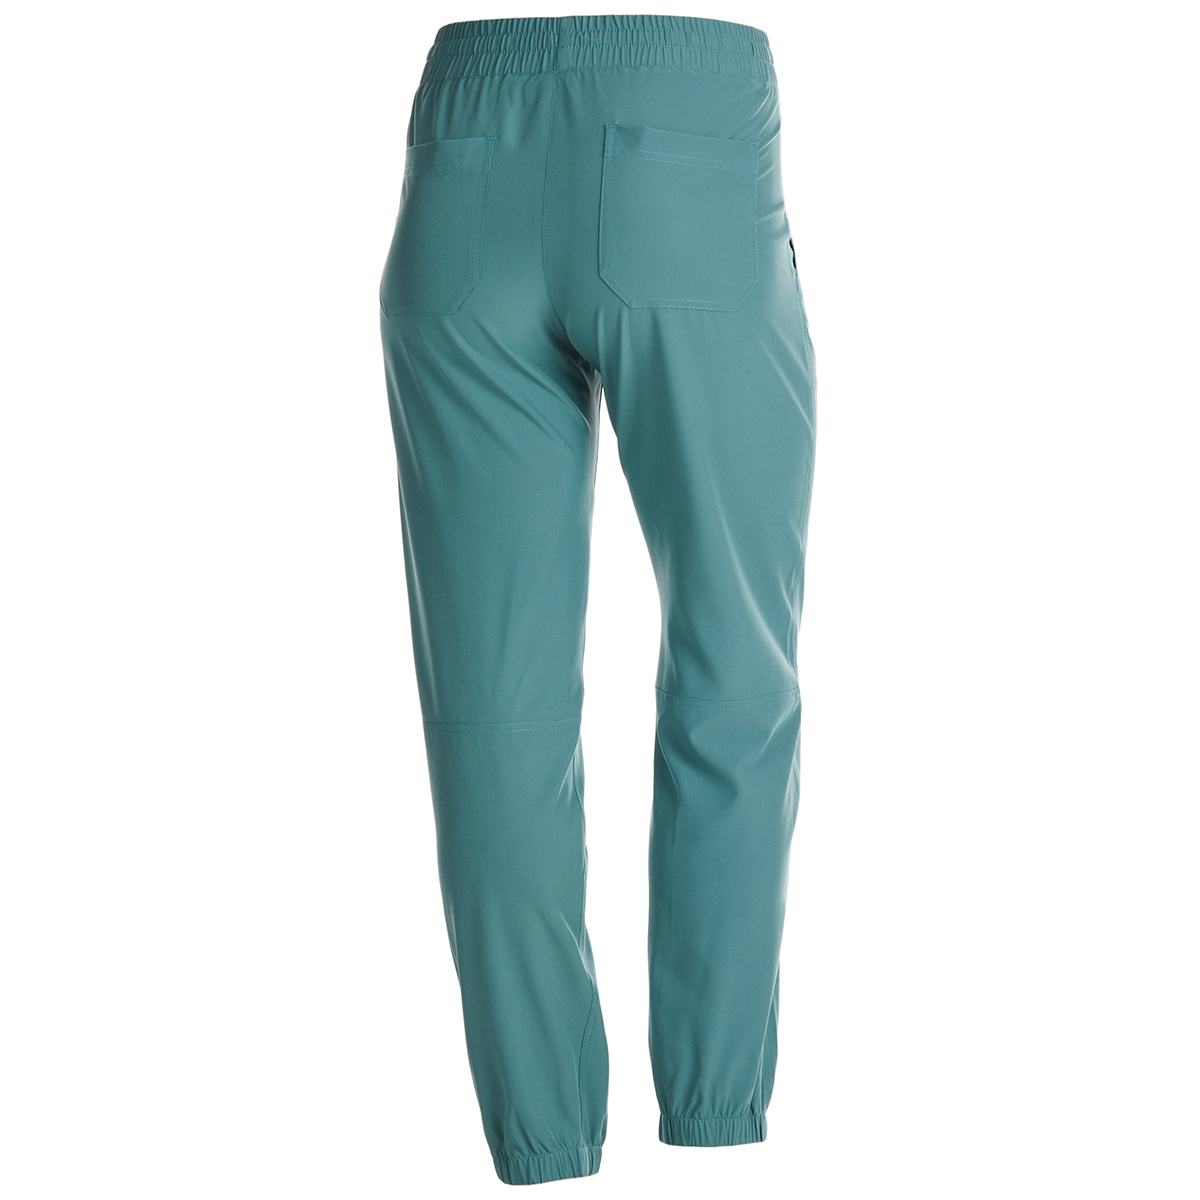 Eastern Mountain Sports Black Active Pants Size S - 71% off